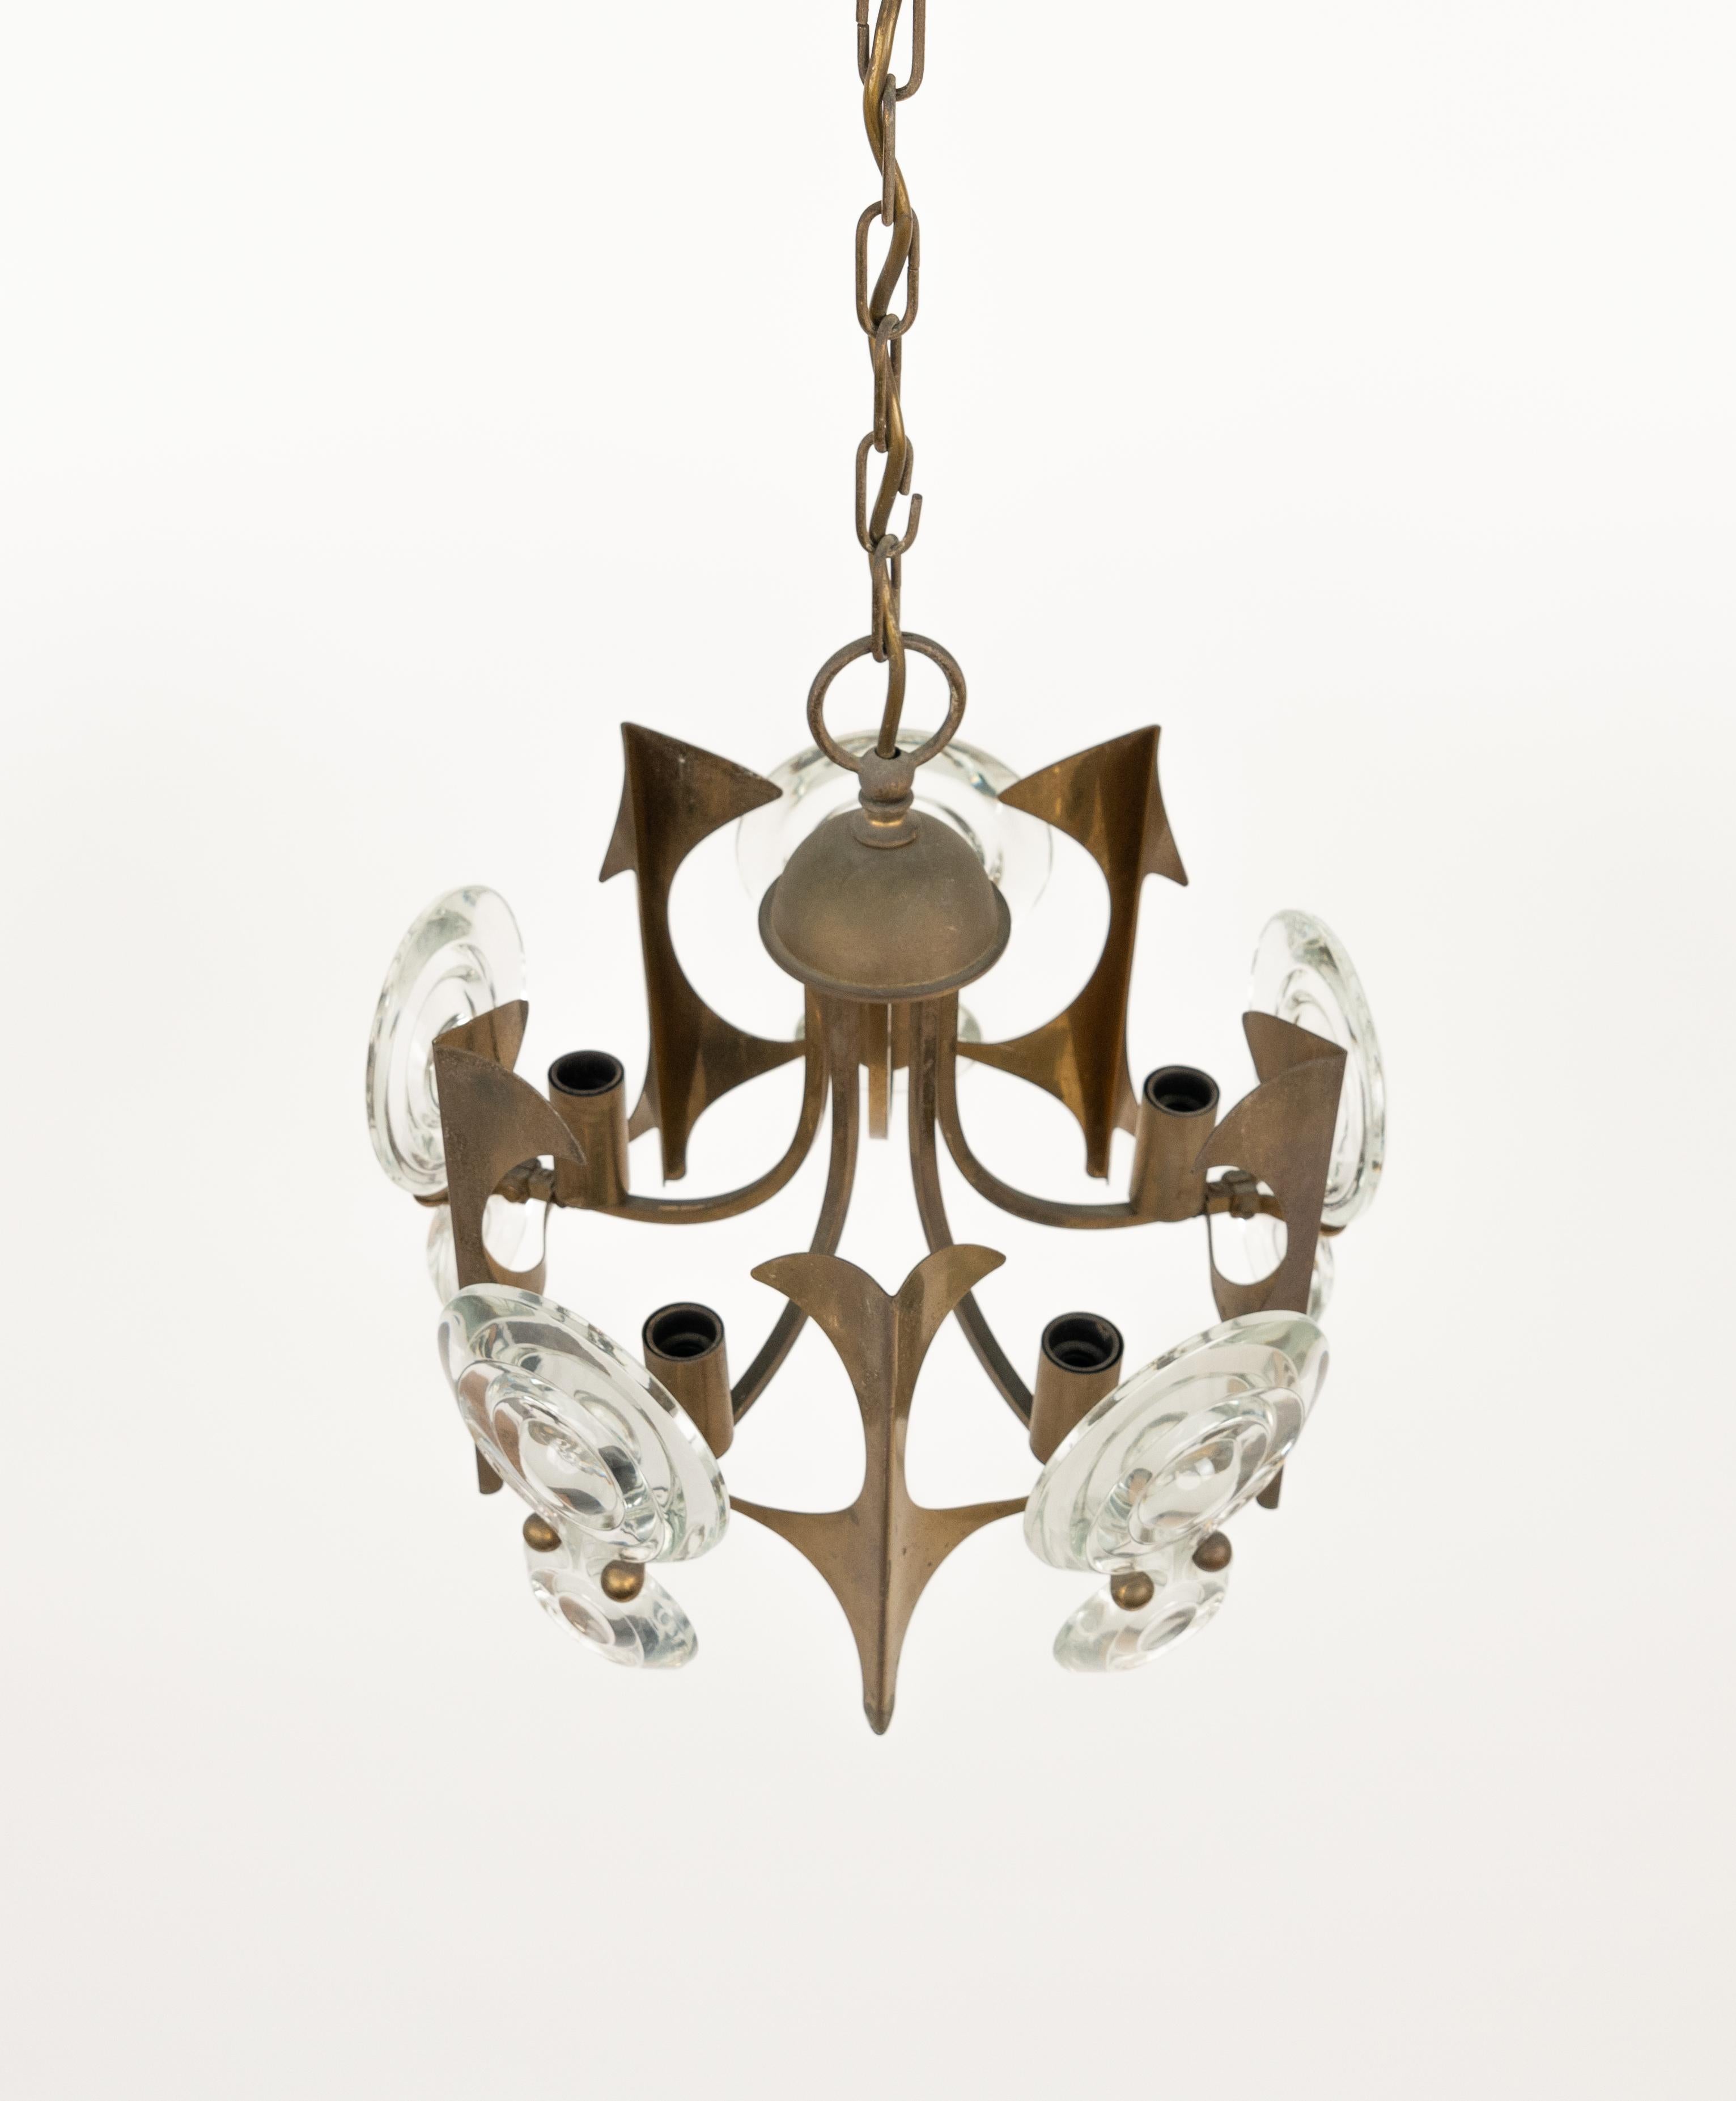 Midcentury Chandelier Brass and Glass by Oscar Torlasco, Italy 1960s For Sale 2